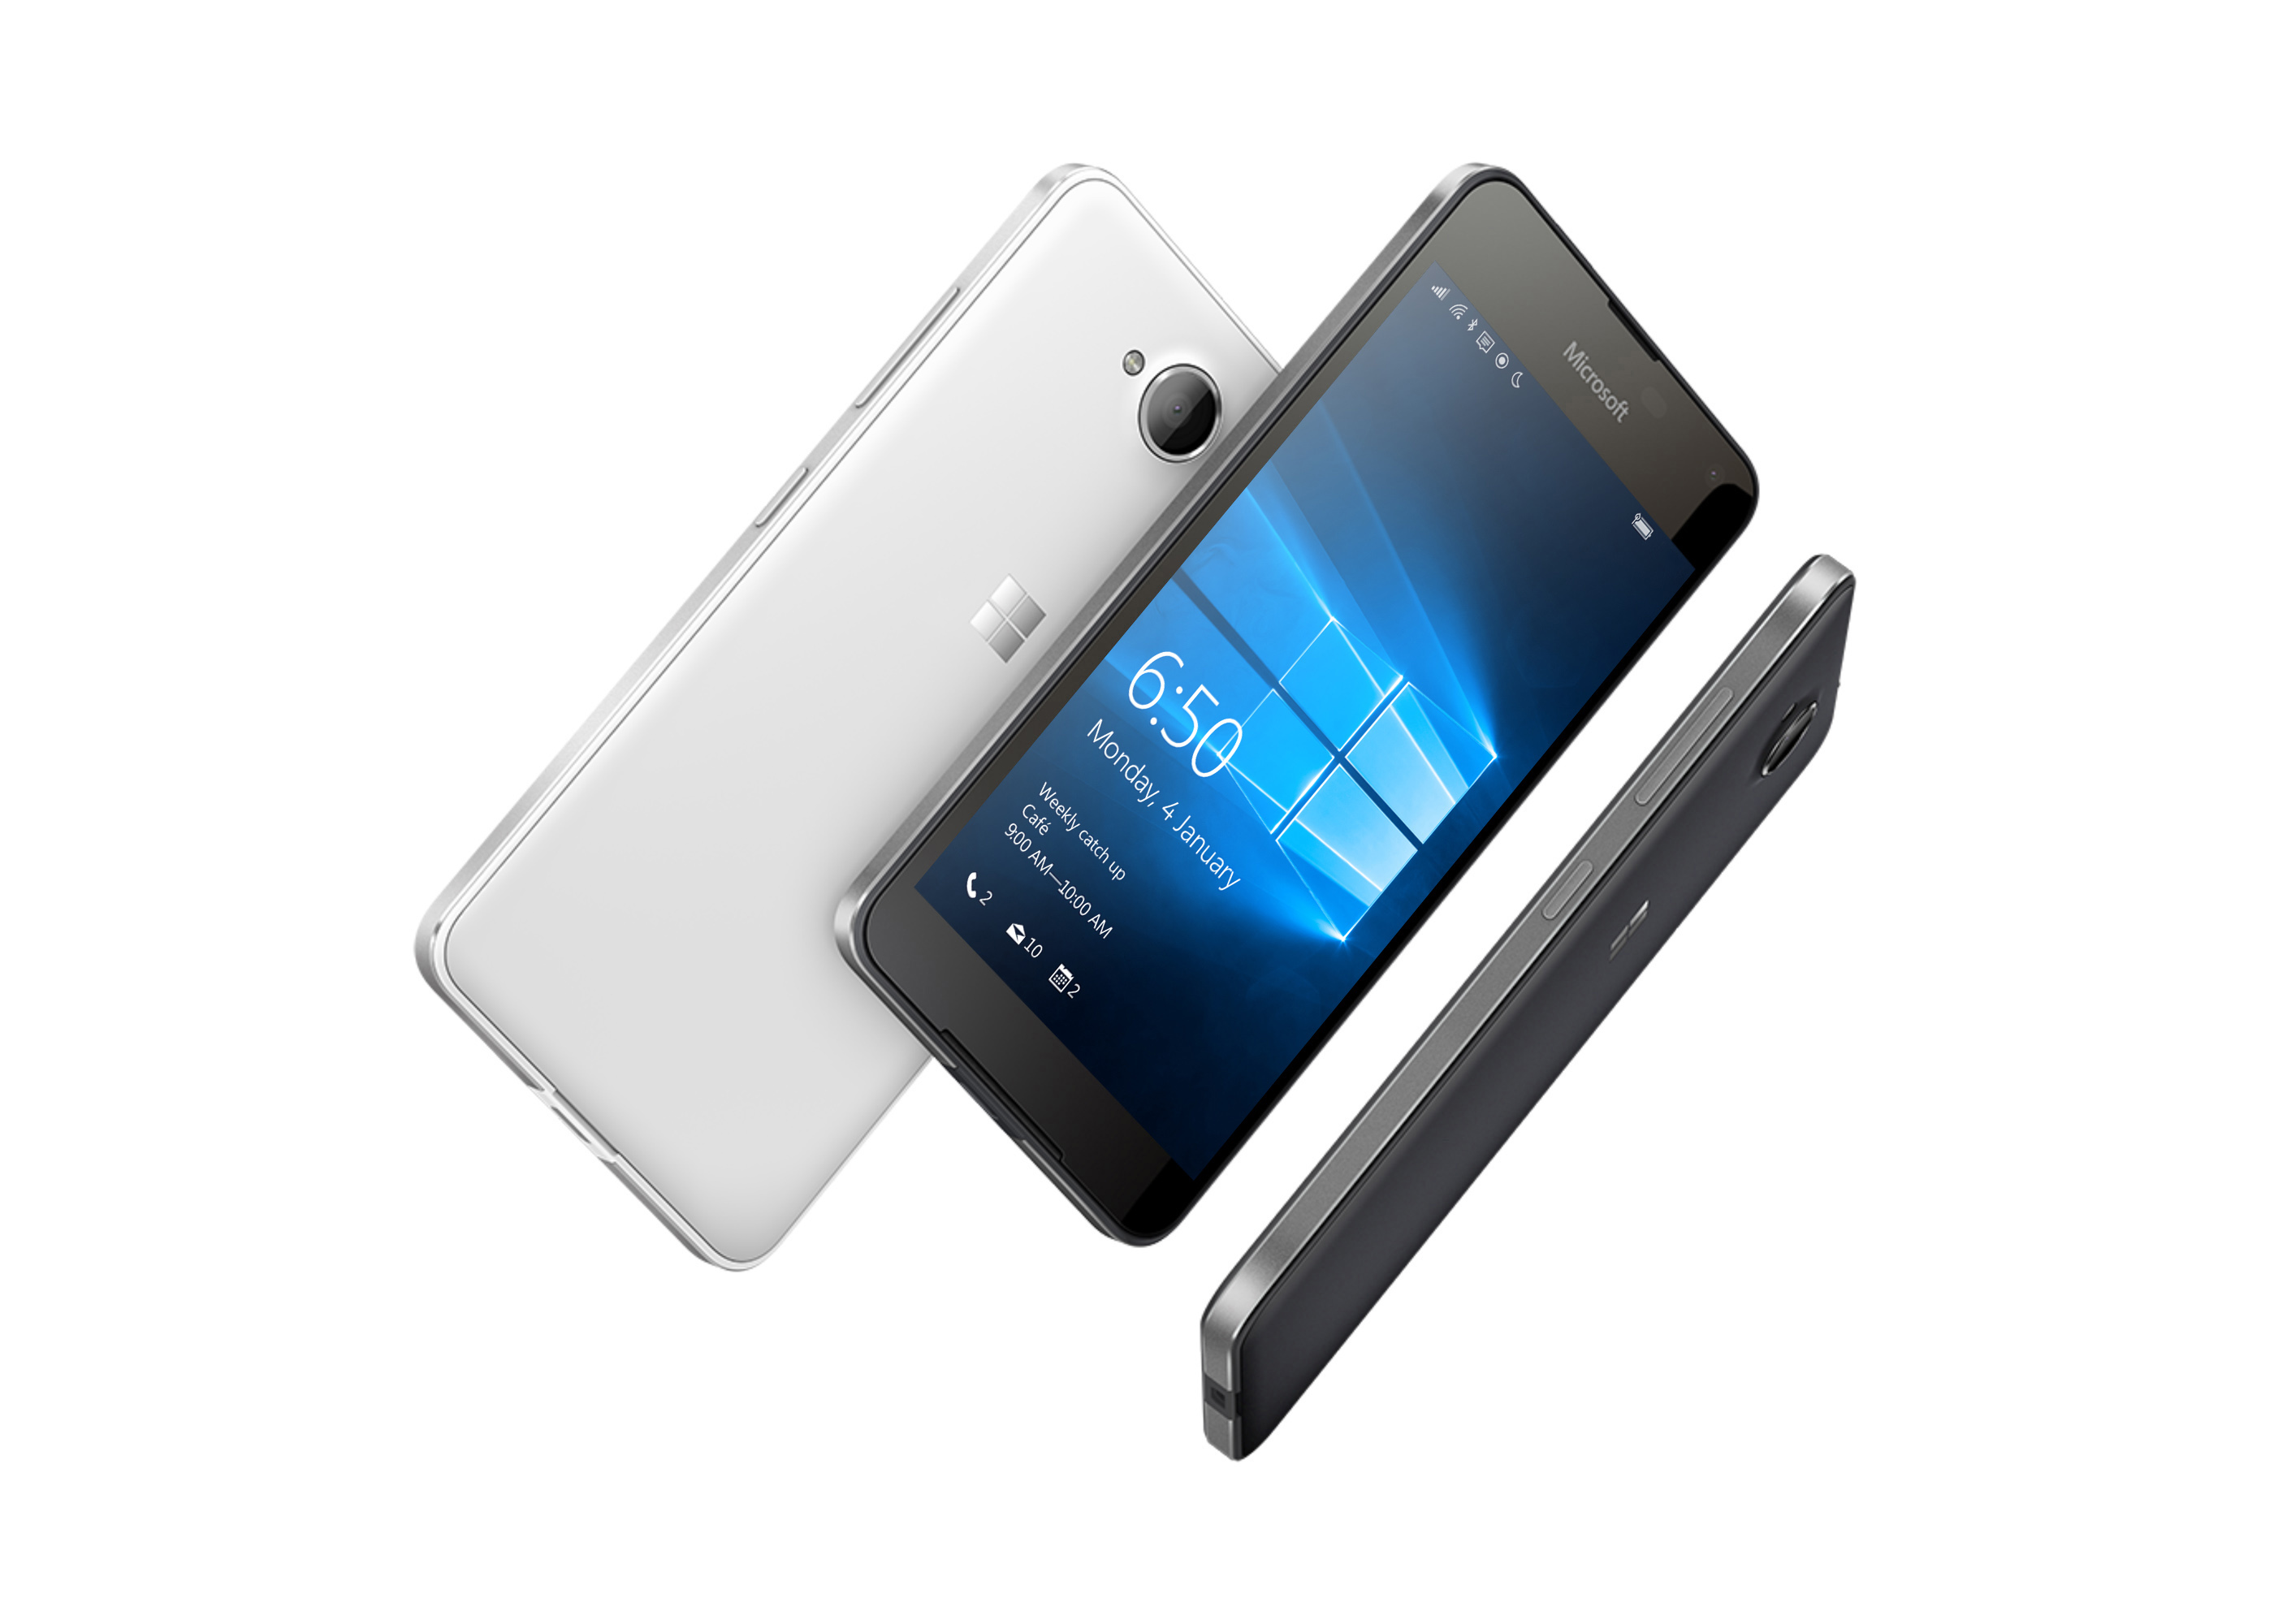 Microsoft Lumia 650 is now available for pre-sales ordering in Thailand at THB 7,190